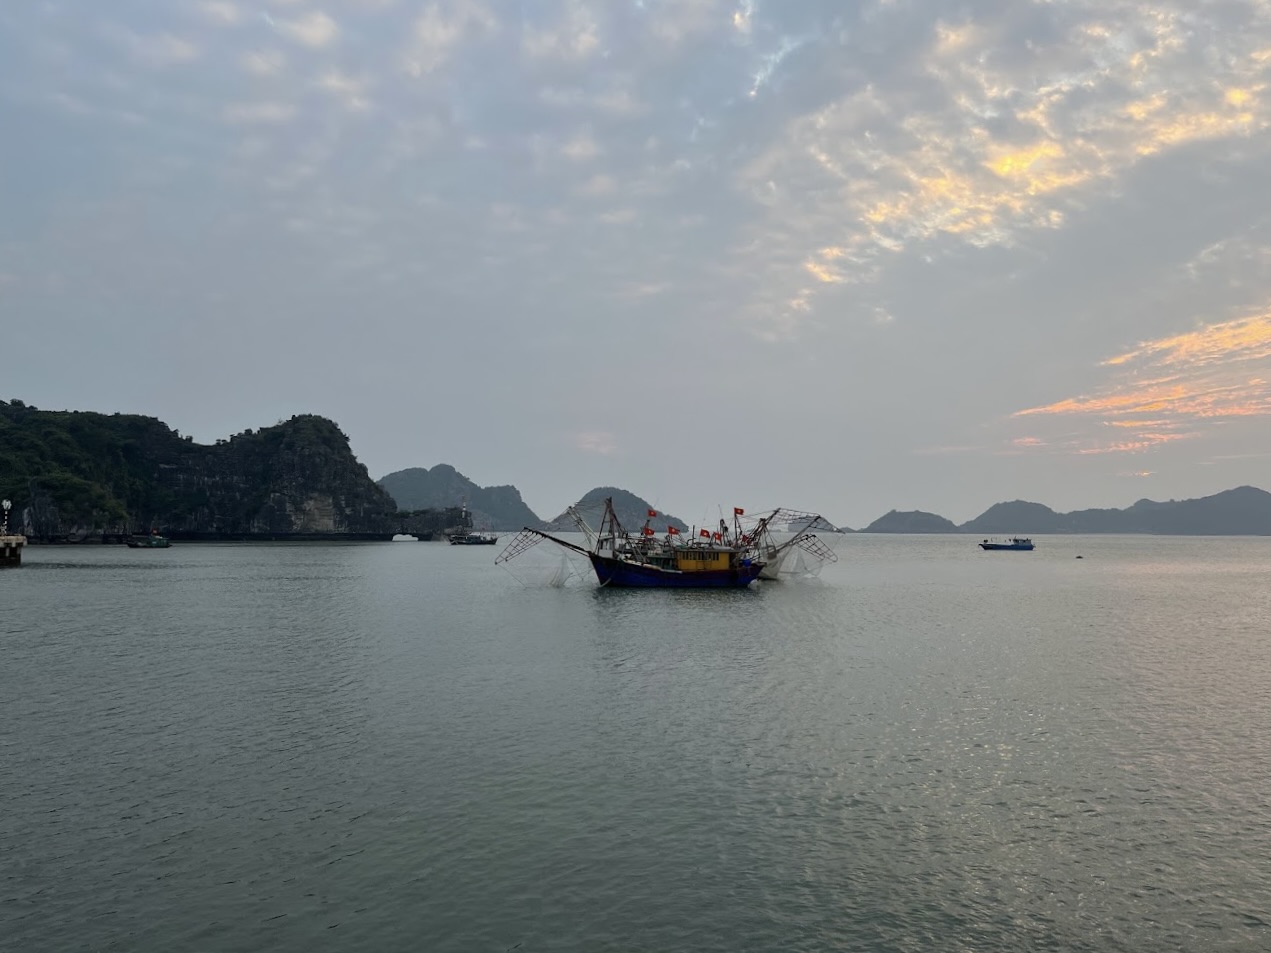 Cloudy sunset over the ocean and rocky coast of Vietnam. Oldschool fishing boat in the center of the image with many flags and nets.